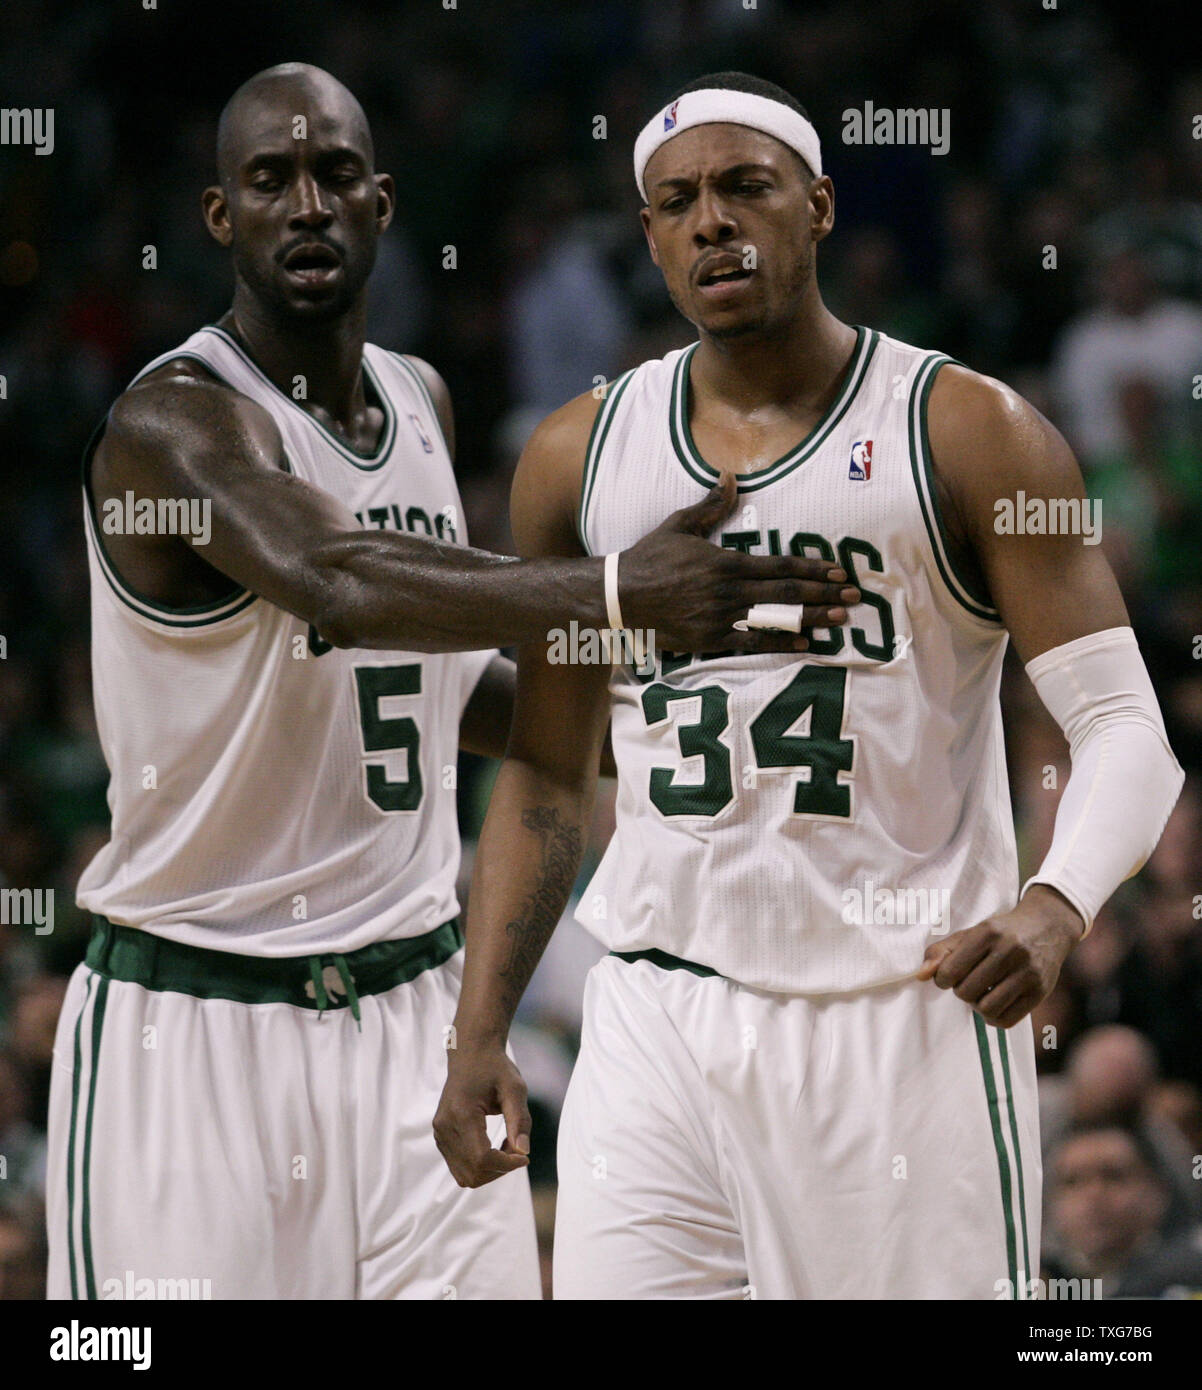 Boston Celtics forward Kevin Garnett (5) pats teammate forward Paul Pierce (34) on the chest after a play against the Miami Heat in the second half of the Eastern Conference Semifinals at the TD Garden in Boston, Massachusetts on May 7, 2011.   UPI/Matthew Healey Stock Photo